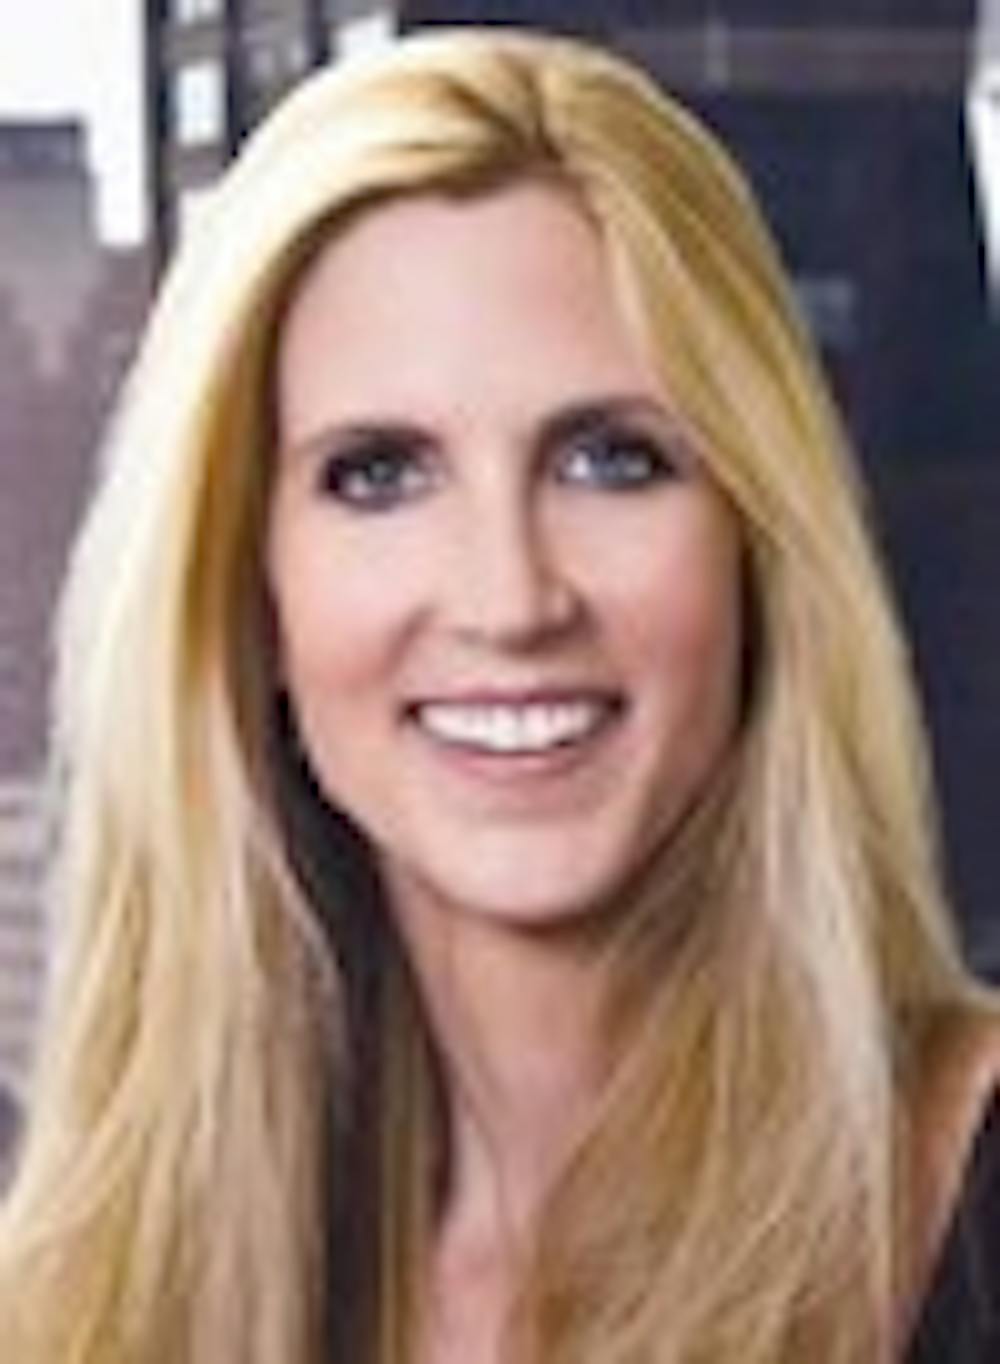 Photo: College Republicans forced to scrap Ann Coulter event